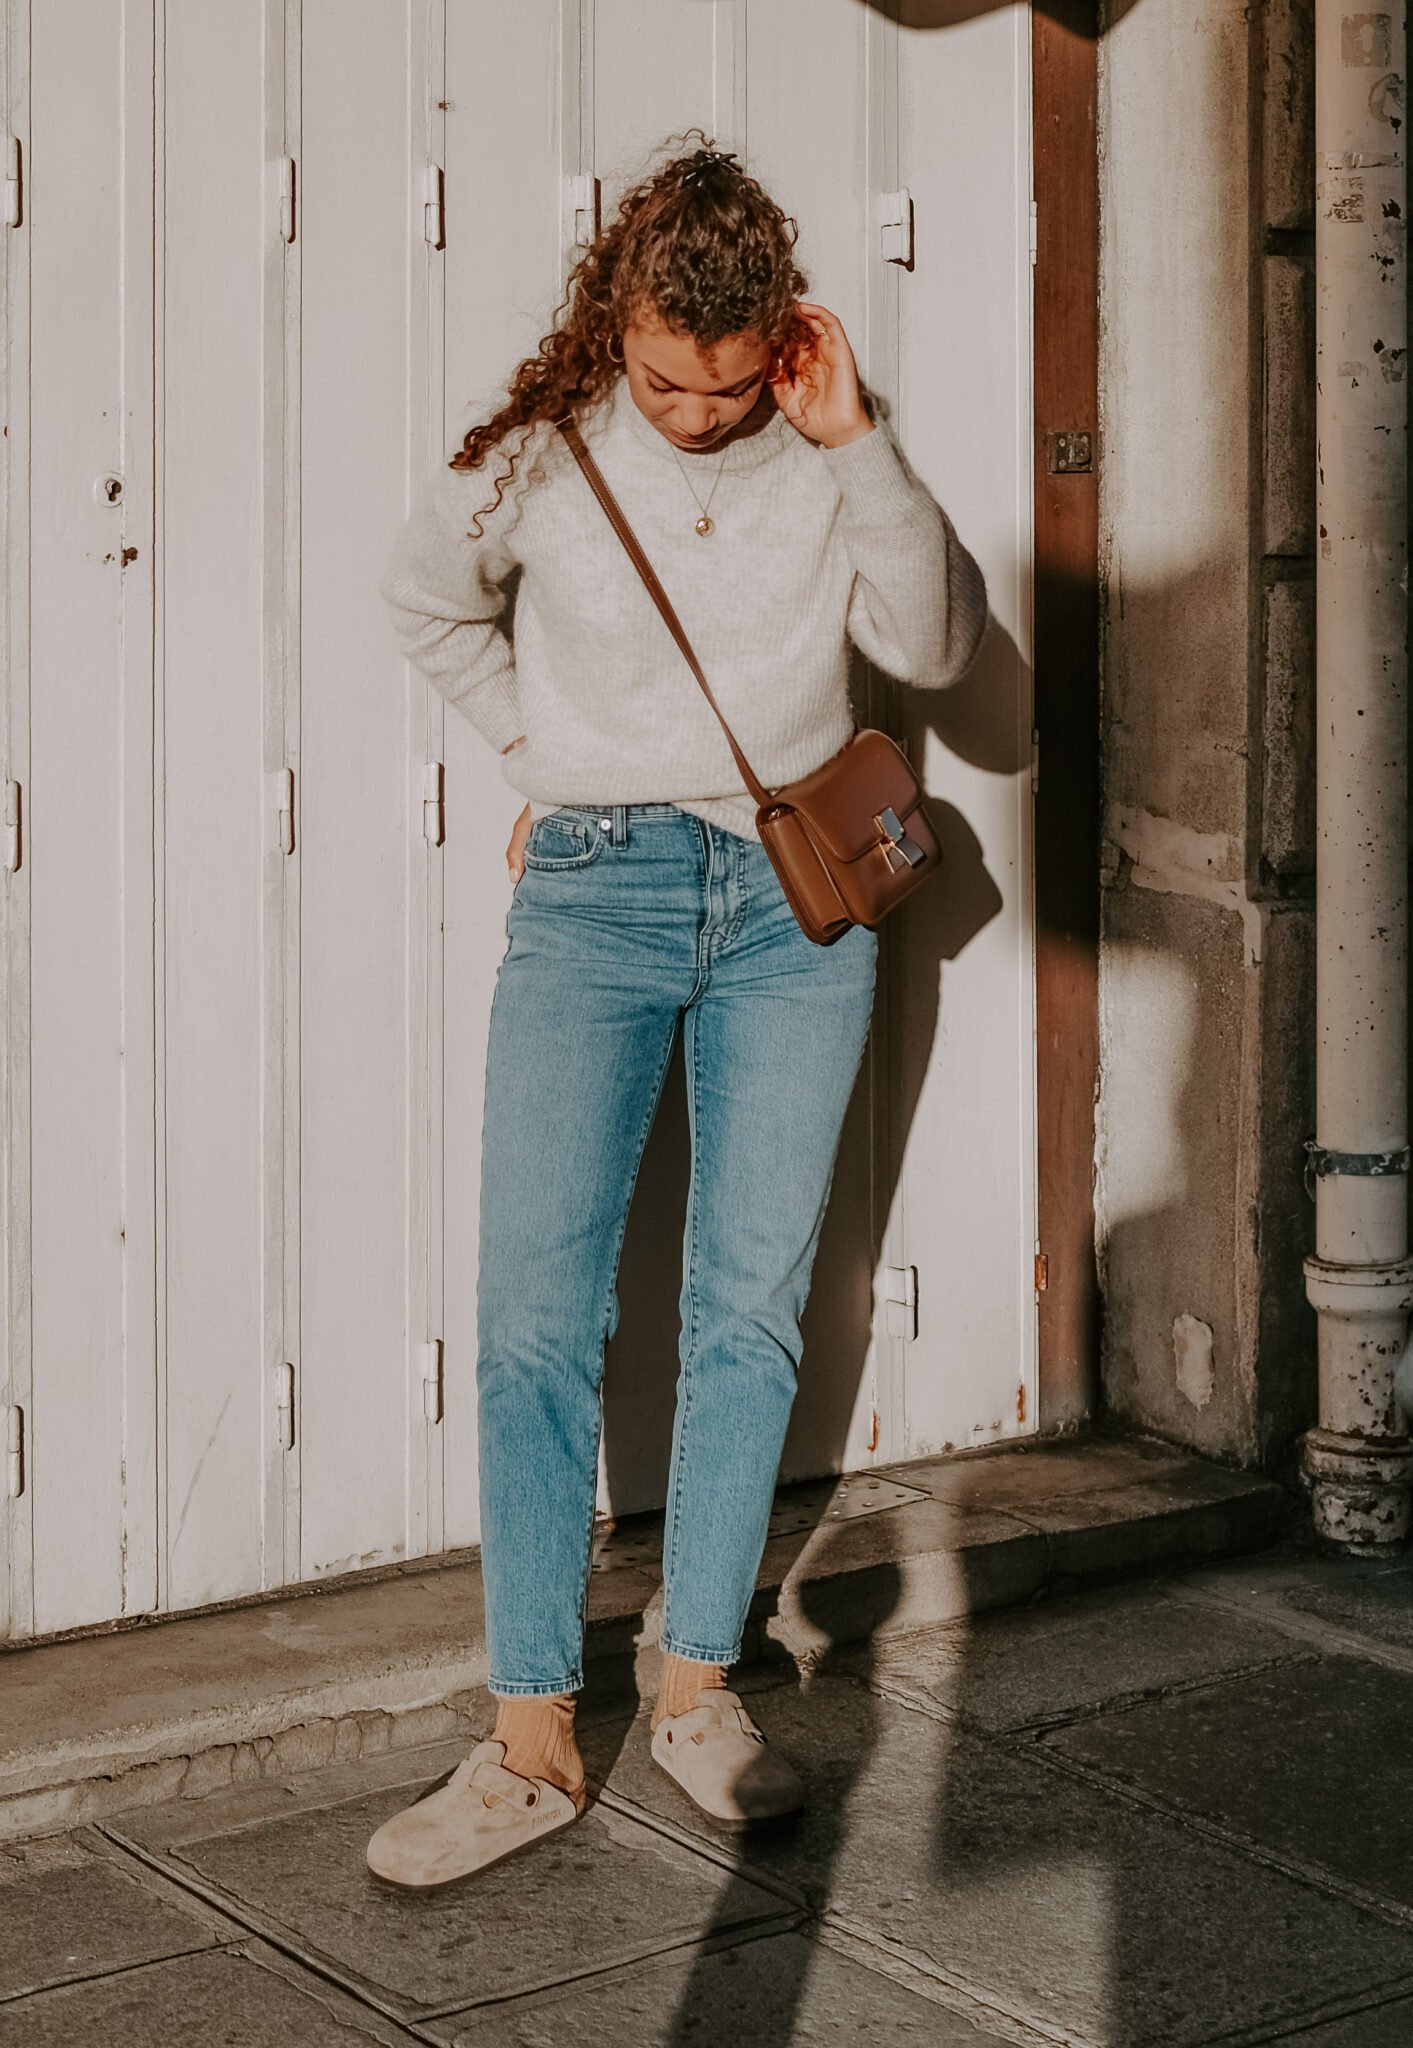 birkenstock boston clog fall outfit